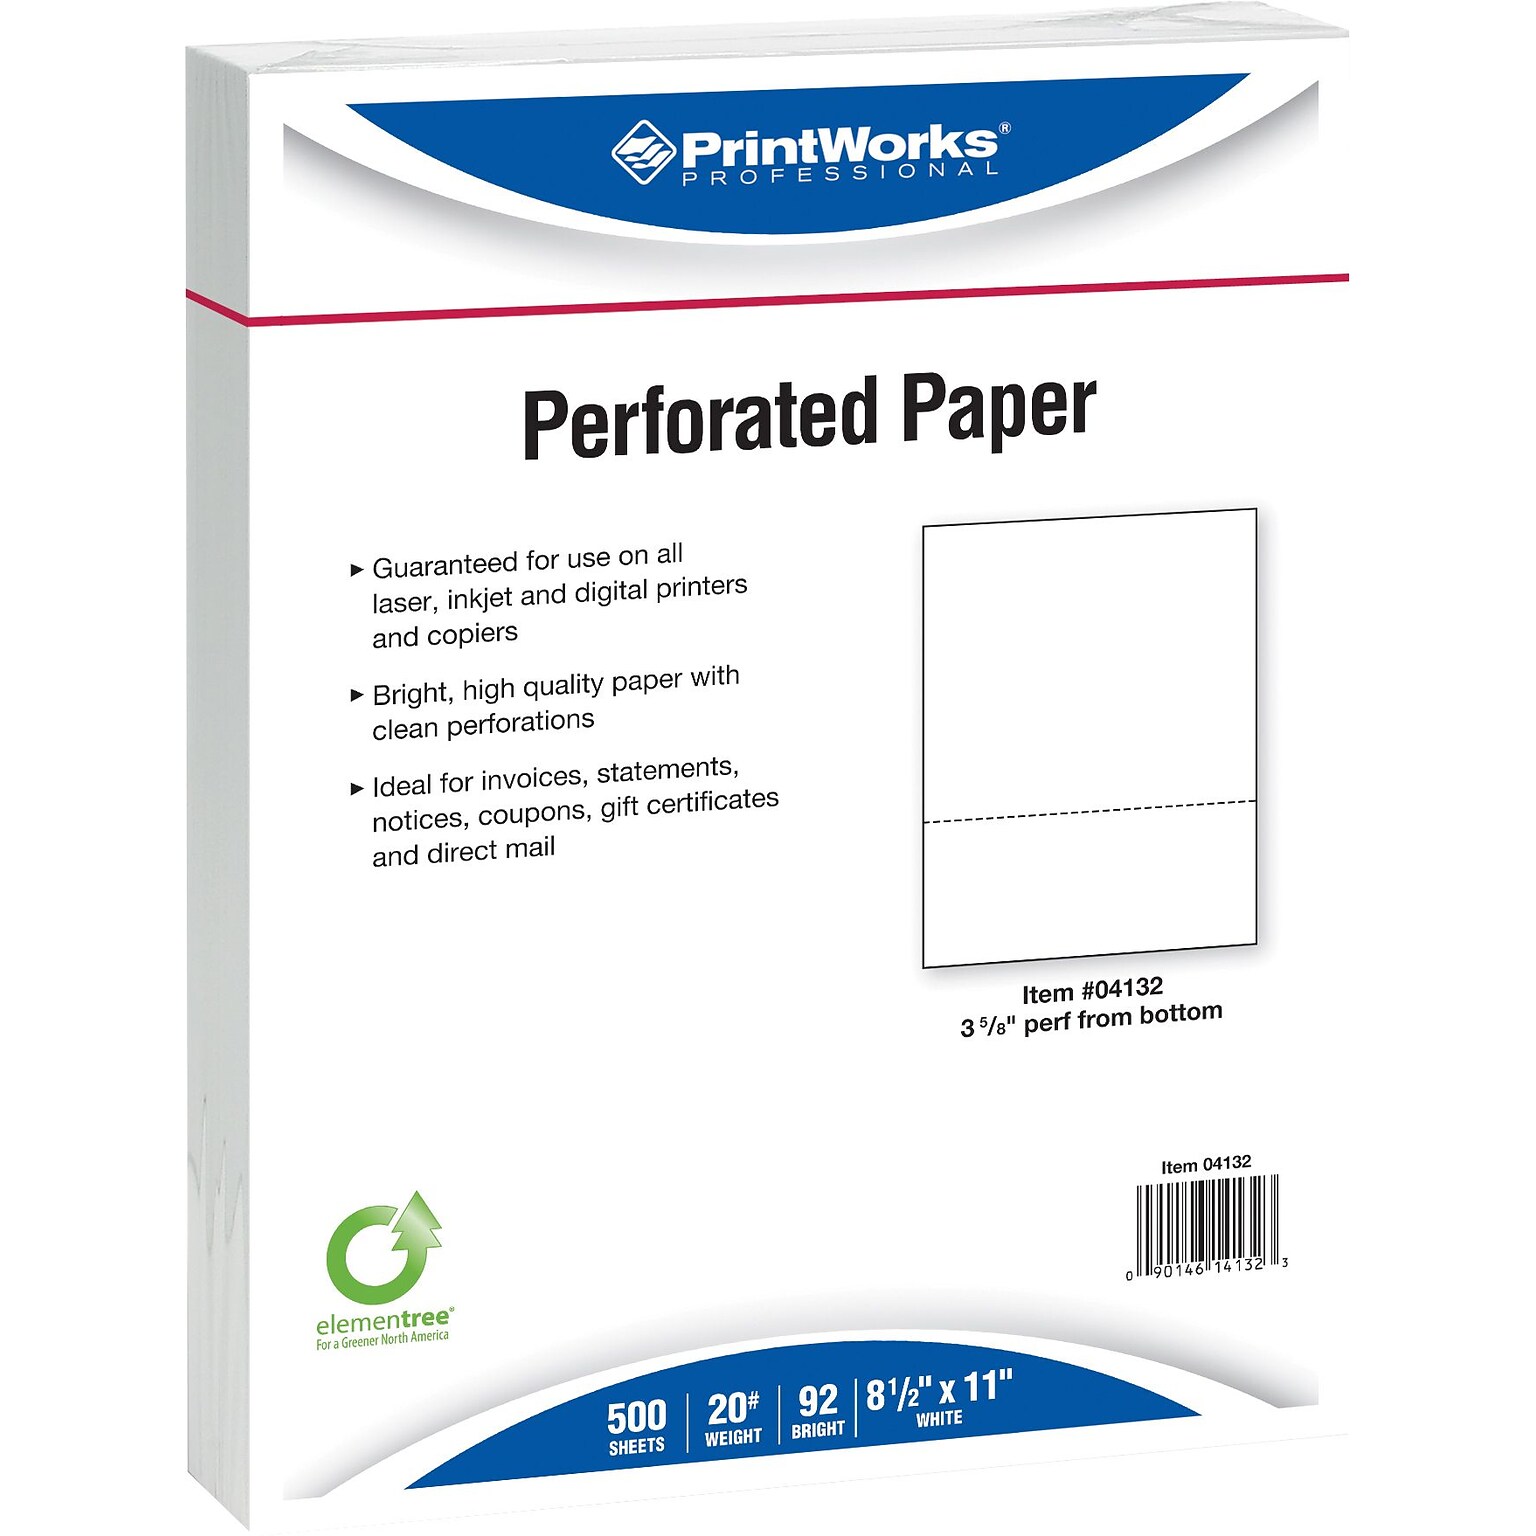 Printworks® Professional 8.5 x 11 Perforated Paper, 20 lbs., 92 Brightness, 2500 Sheets/Carton (04132P)